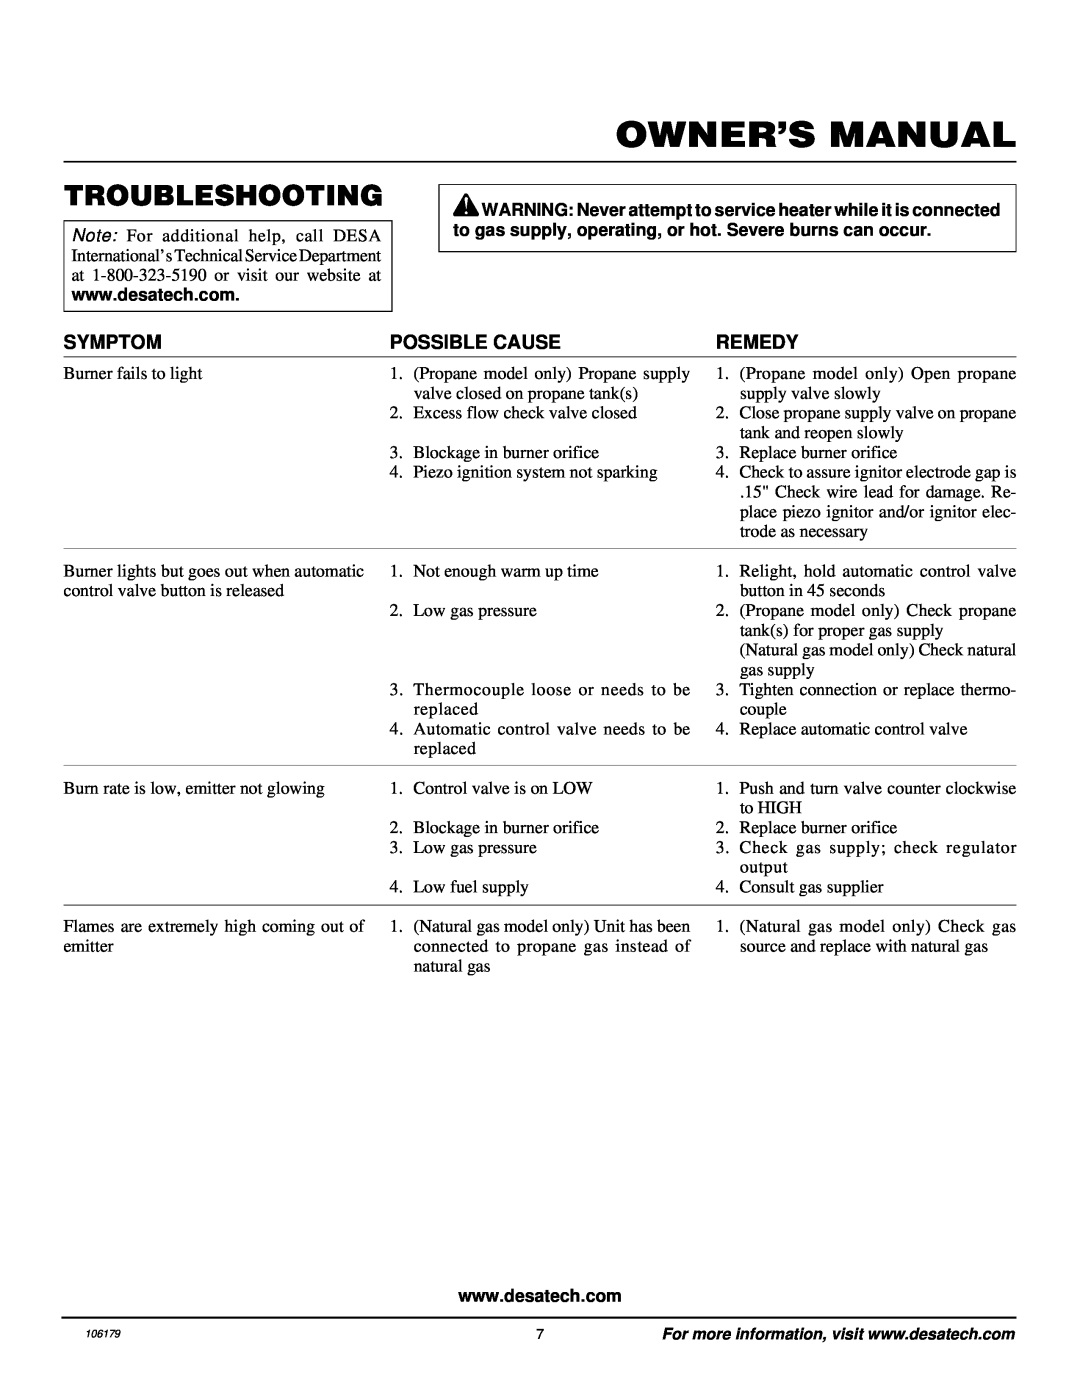 Desa TC100VRNG owner manual Troubleshooting, Symptom, Possible Cause, Remedy 